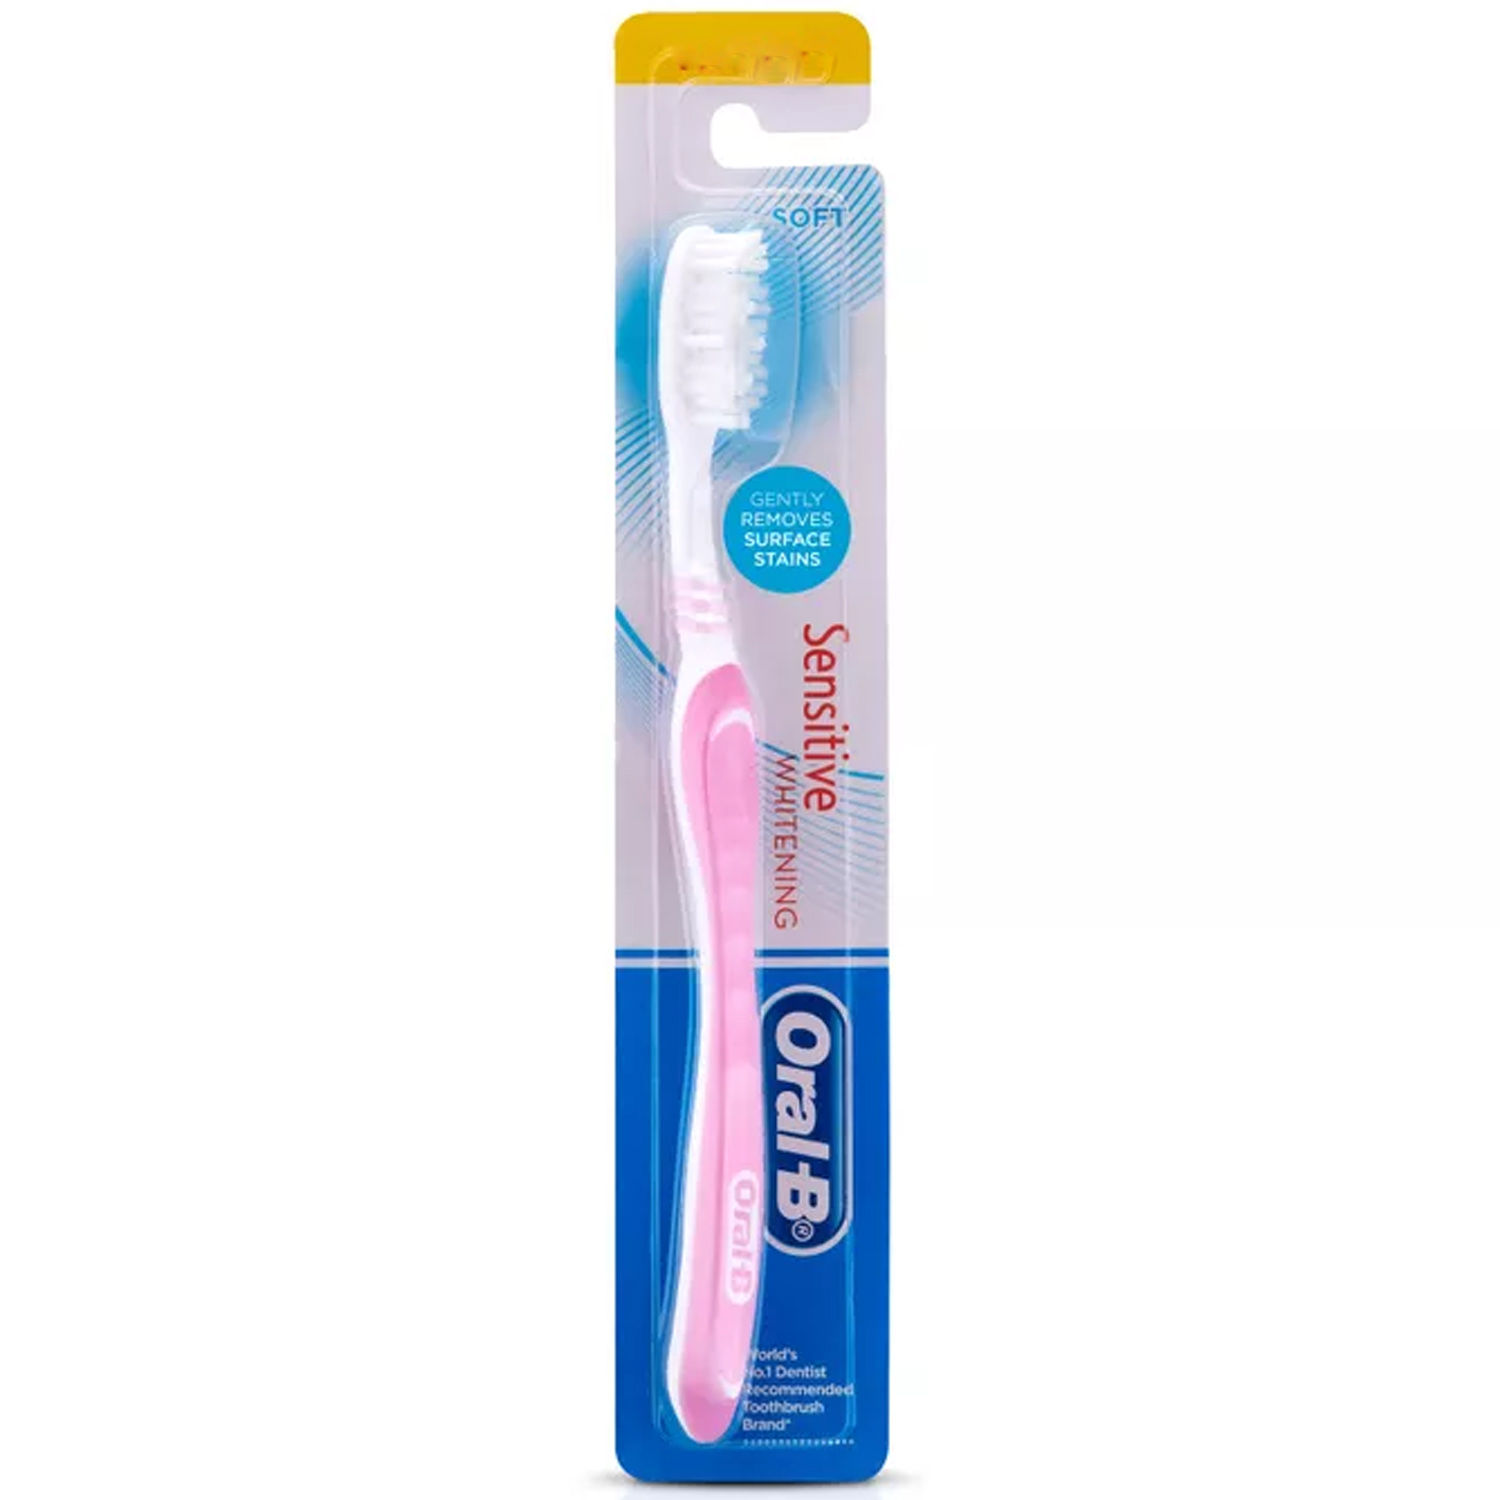 Buy Oral-B Sensitive Whitening Soft Toothbrush, 1 Count Online